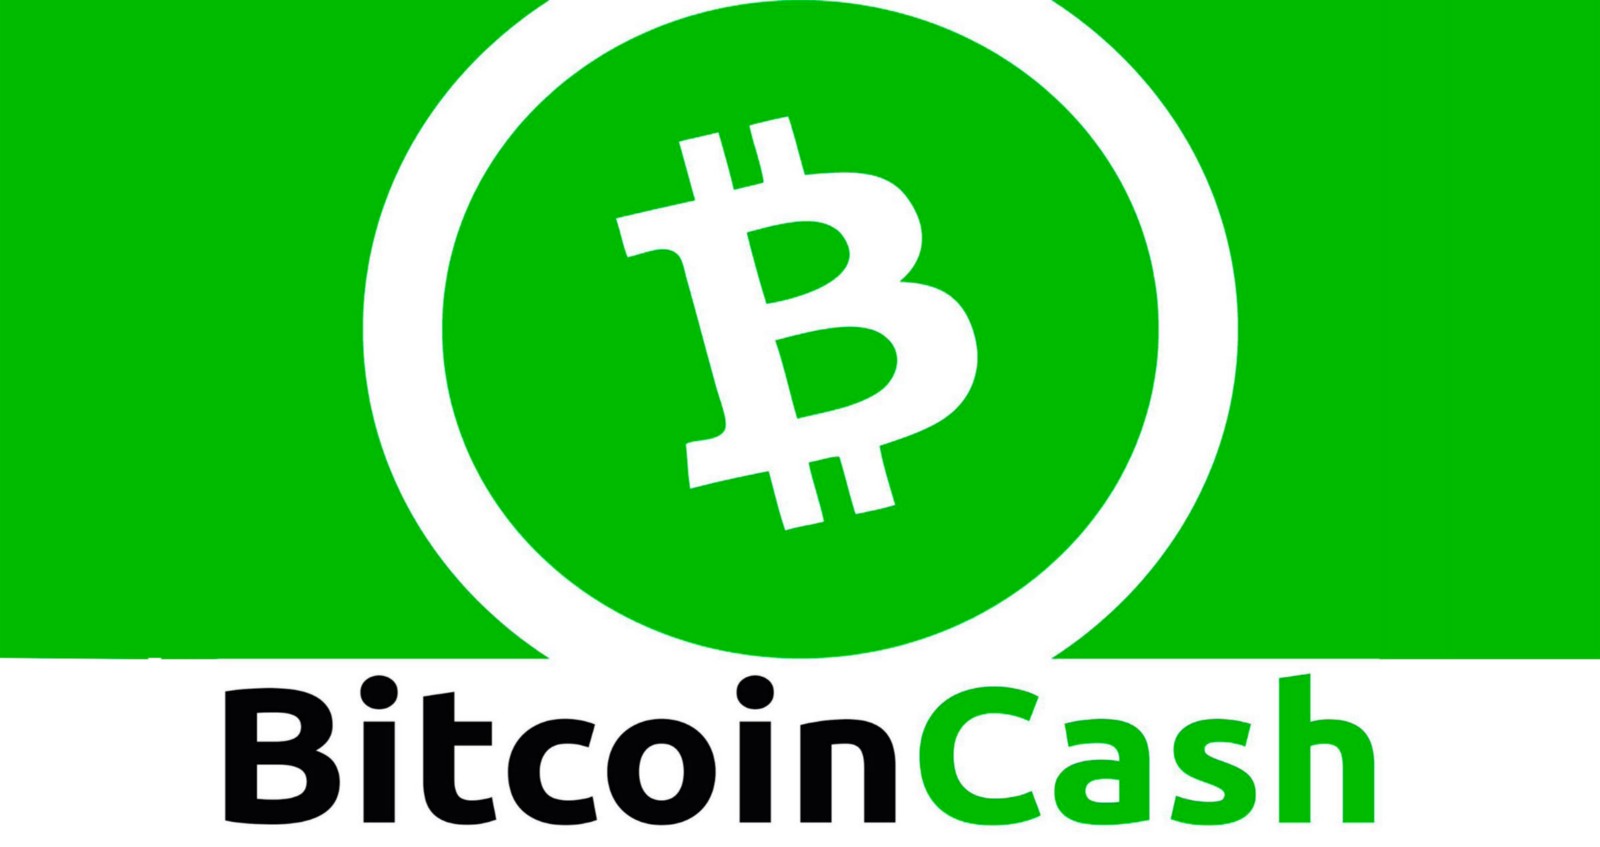 should i buy bitcoin cash right now